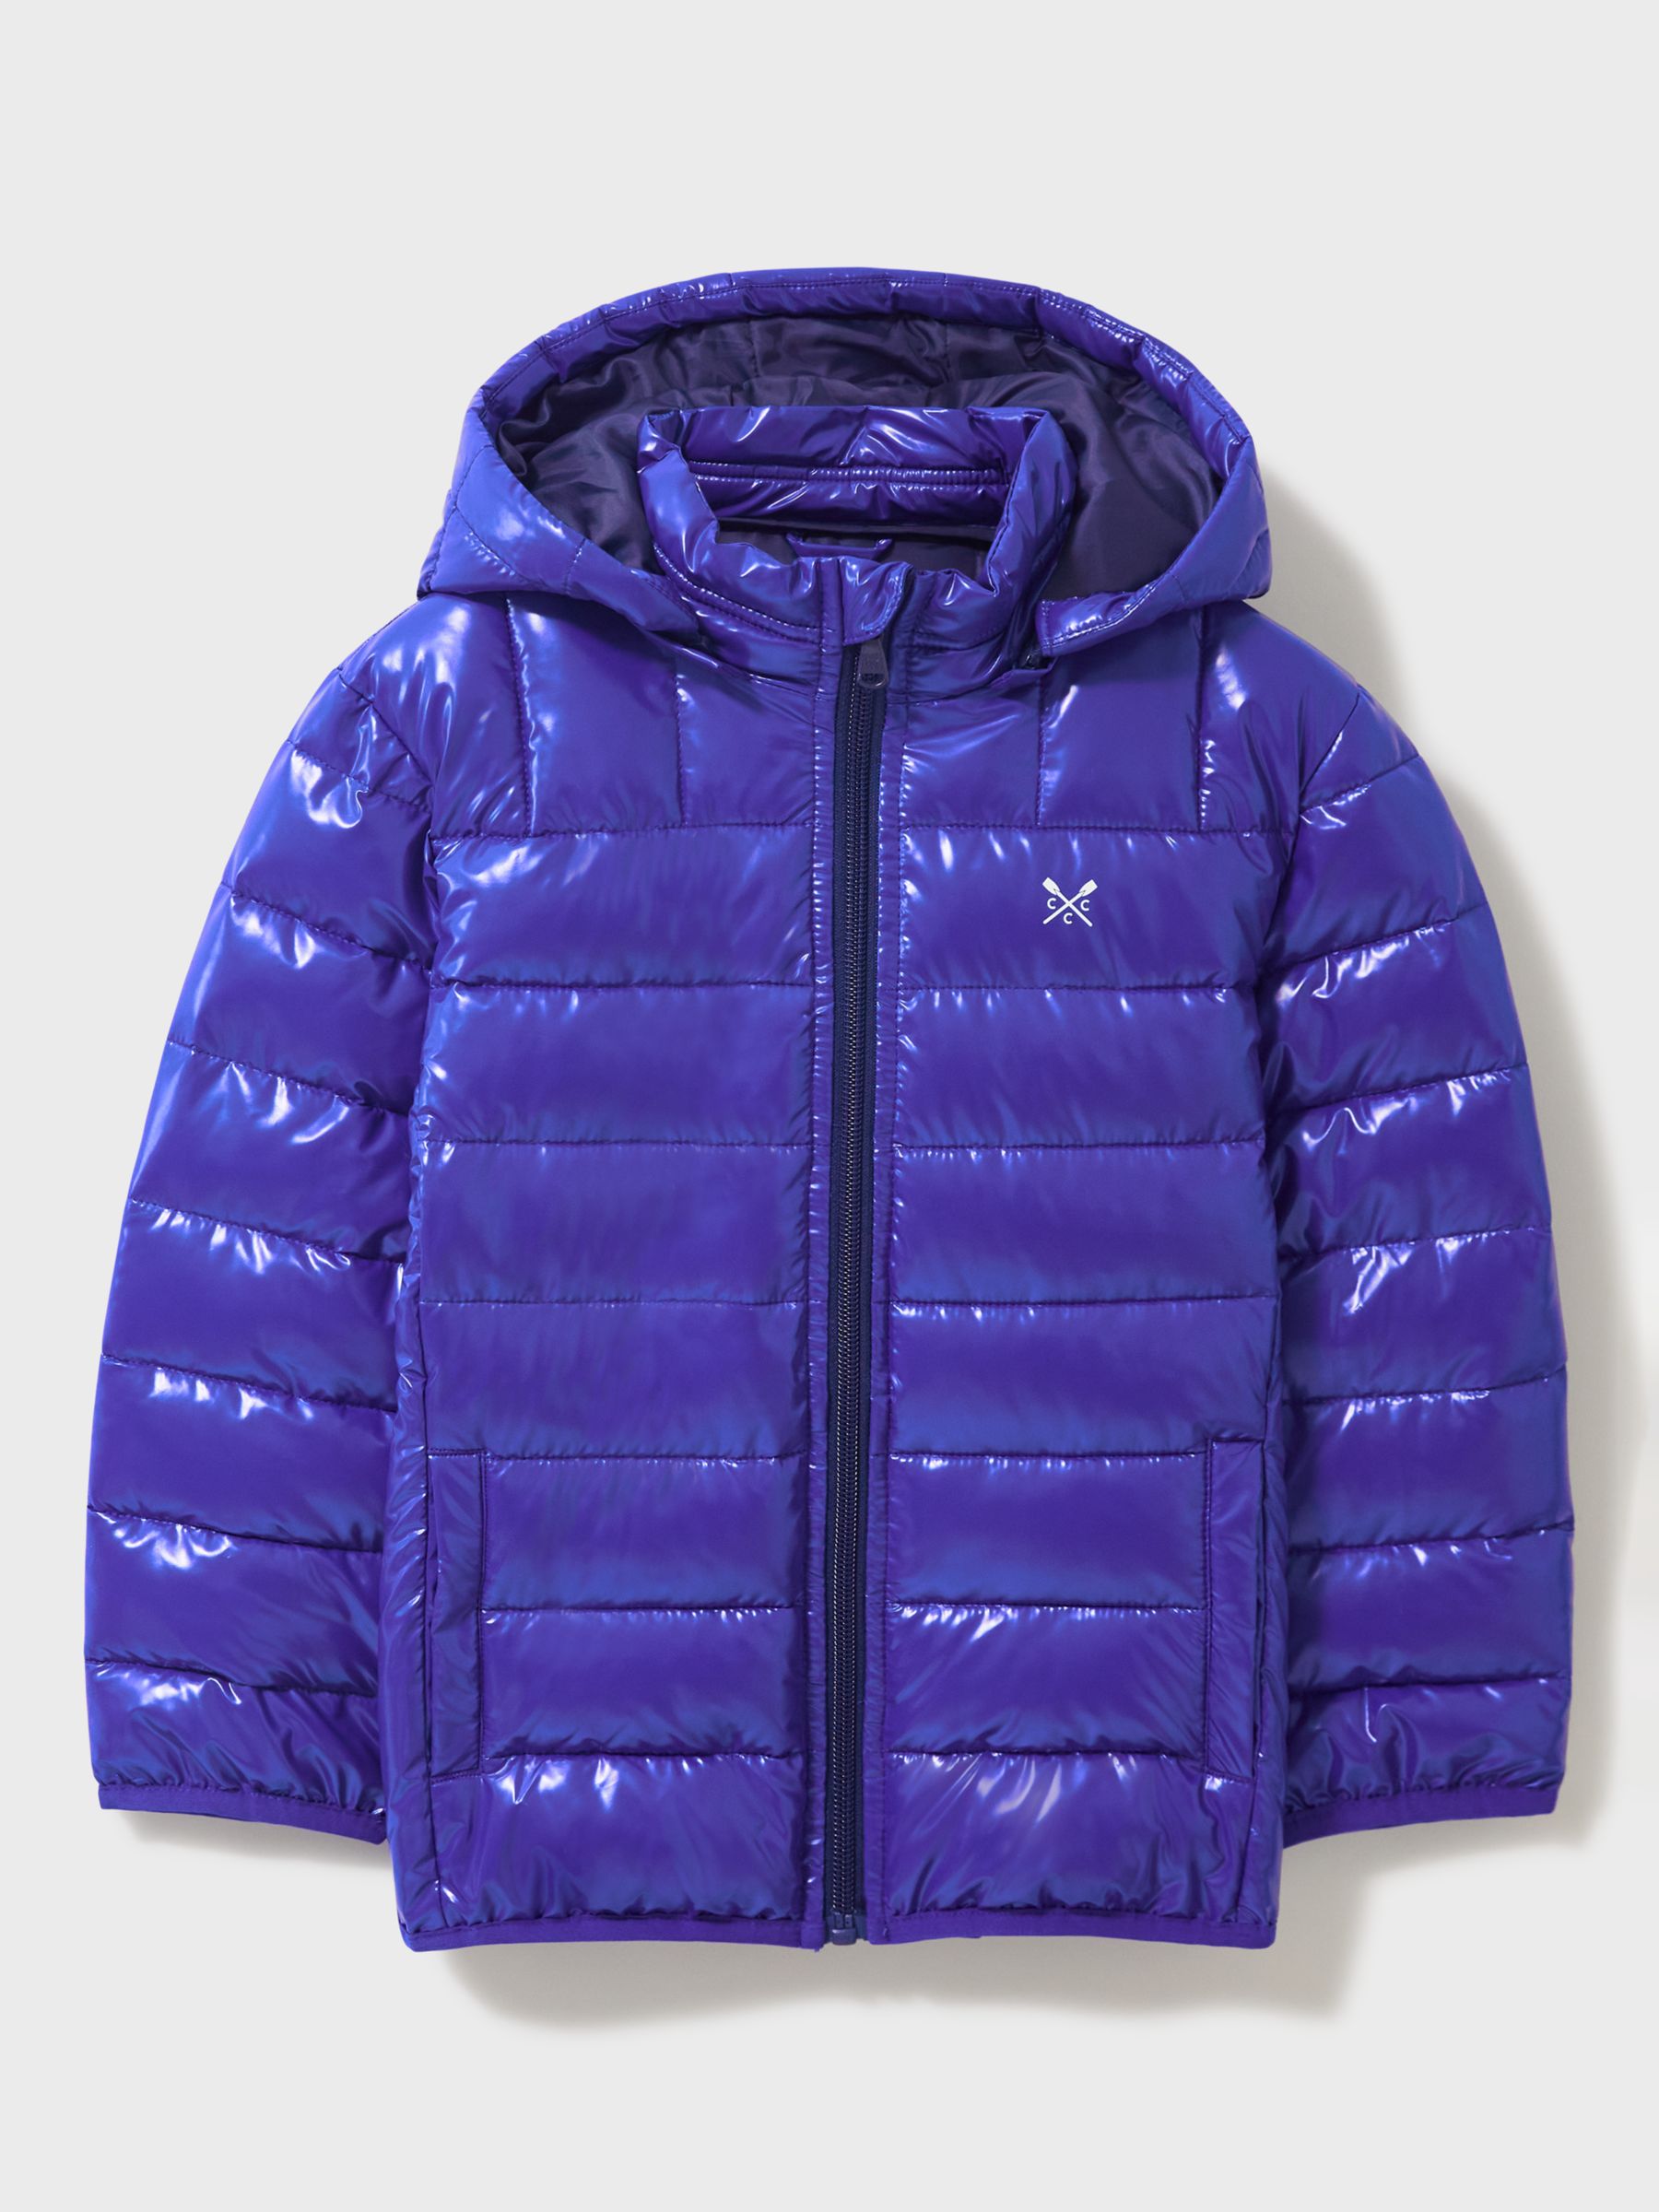 Crew Clothing Kids' Lightweight Lowther Padded Jacket, Blue at